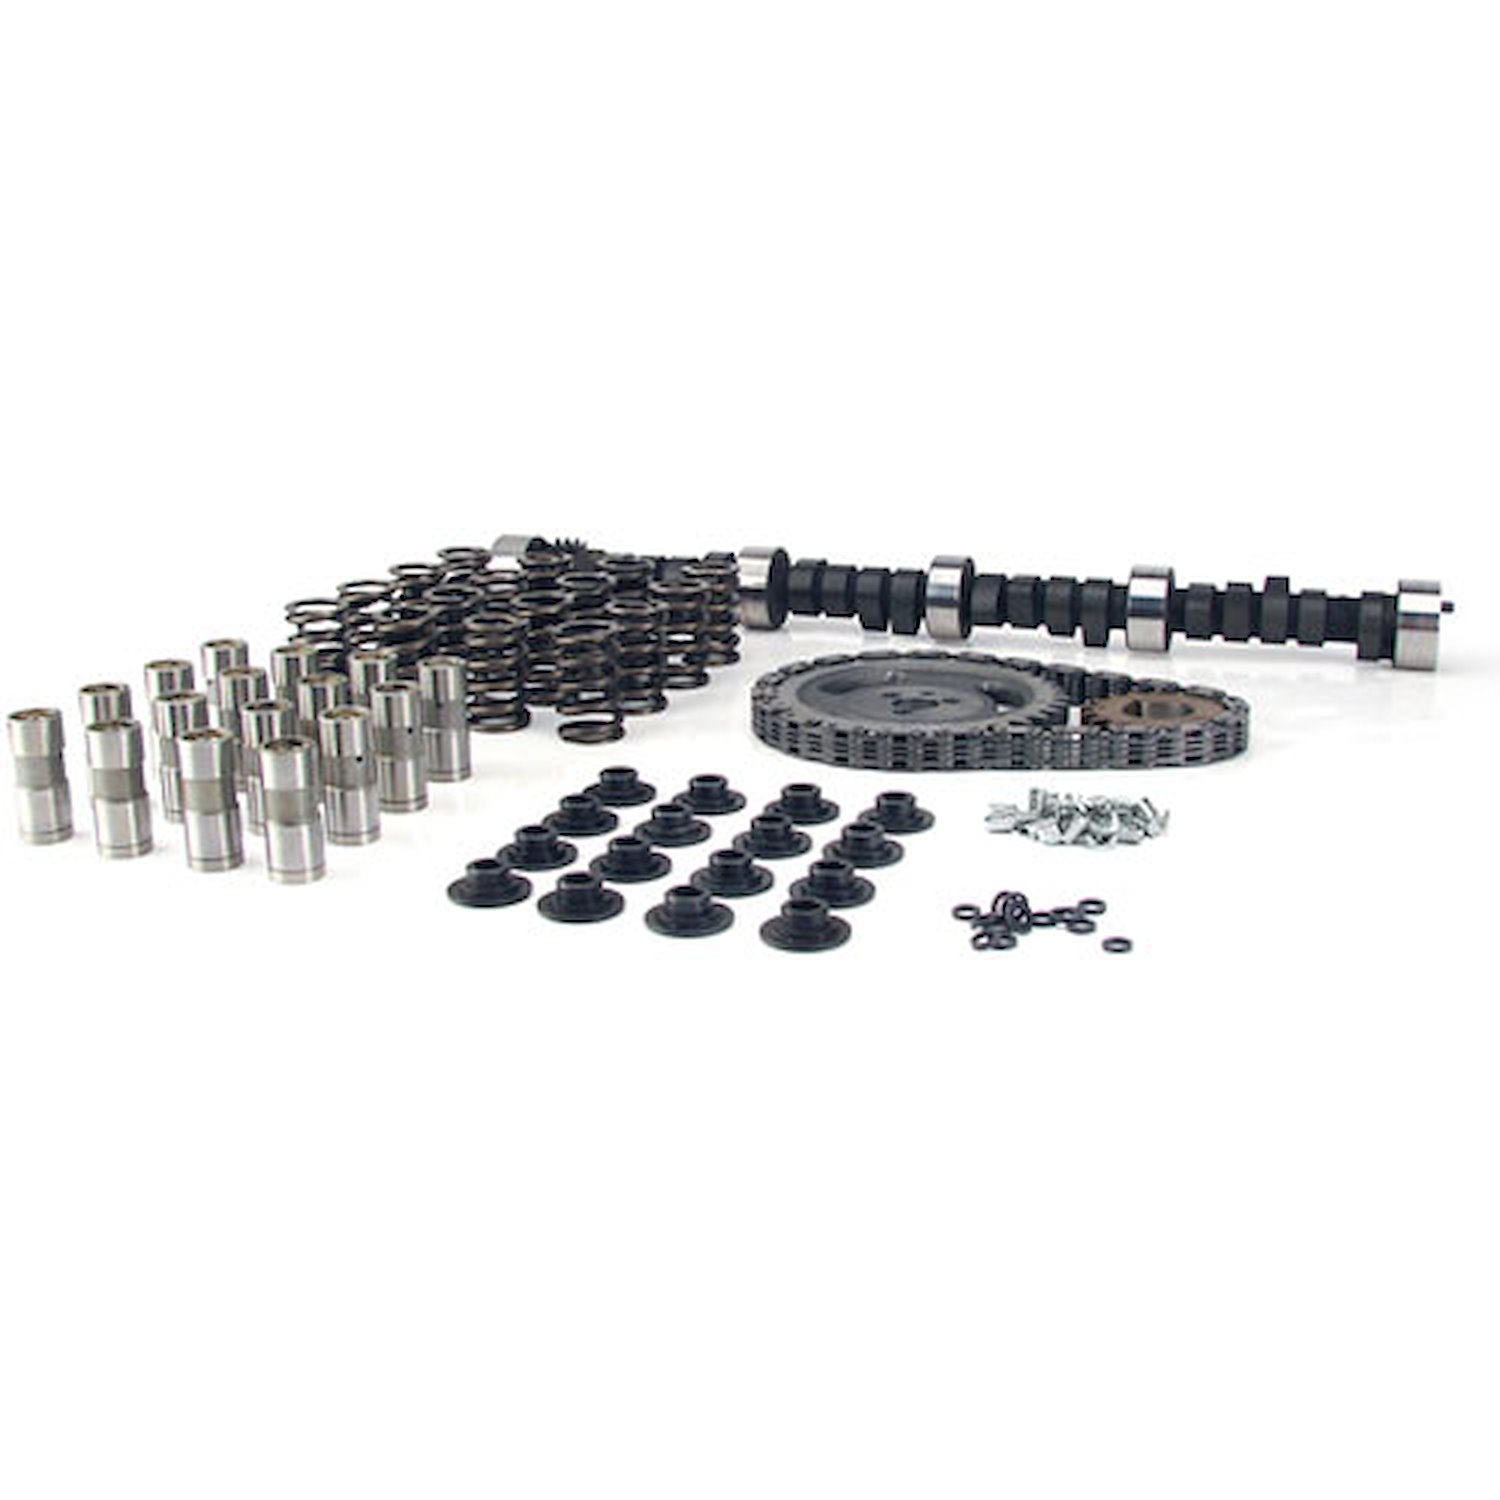 Xtreme Energy 294H Hydraulic Flat Tappet Camshaft Complete Kit Lift: .519"/.523" Duration: 294°/306° RPM Range: 2800-7000